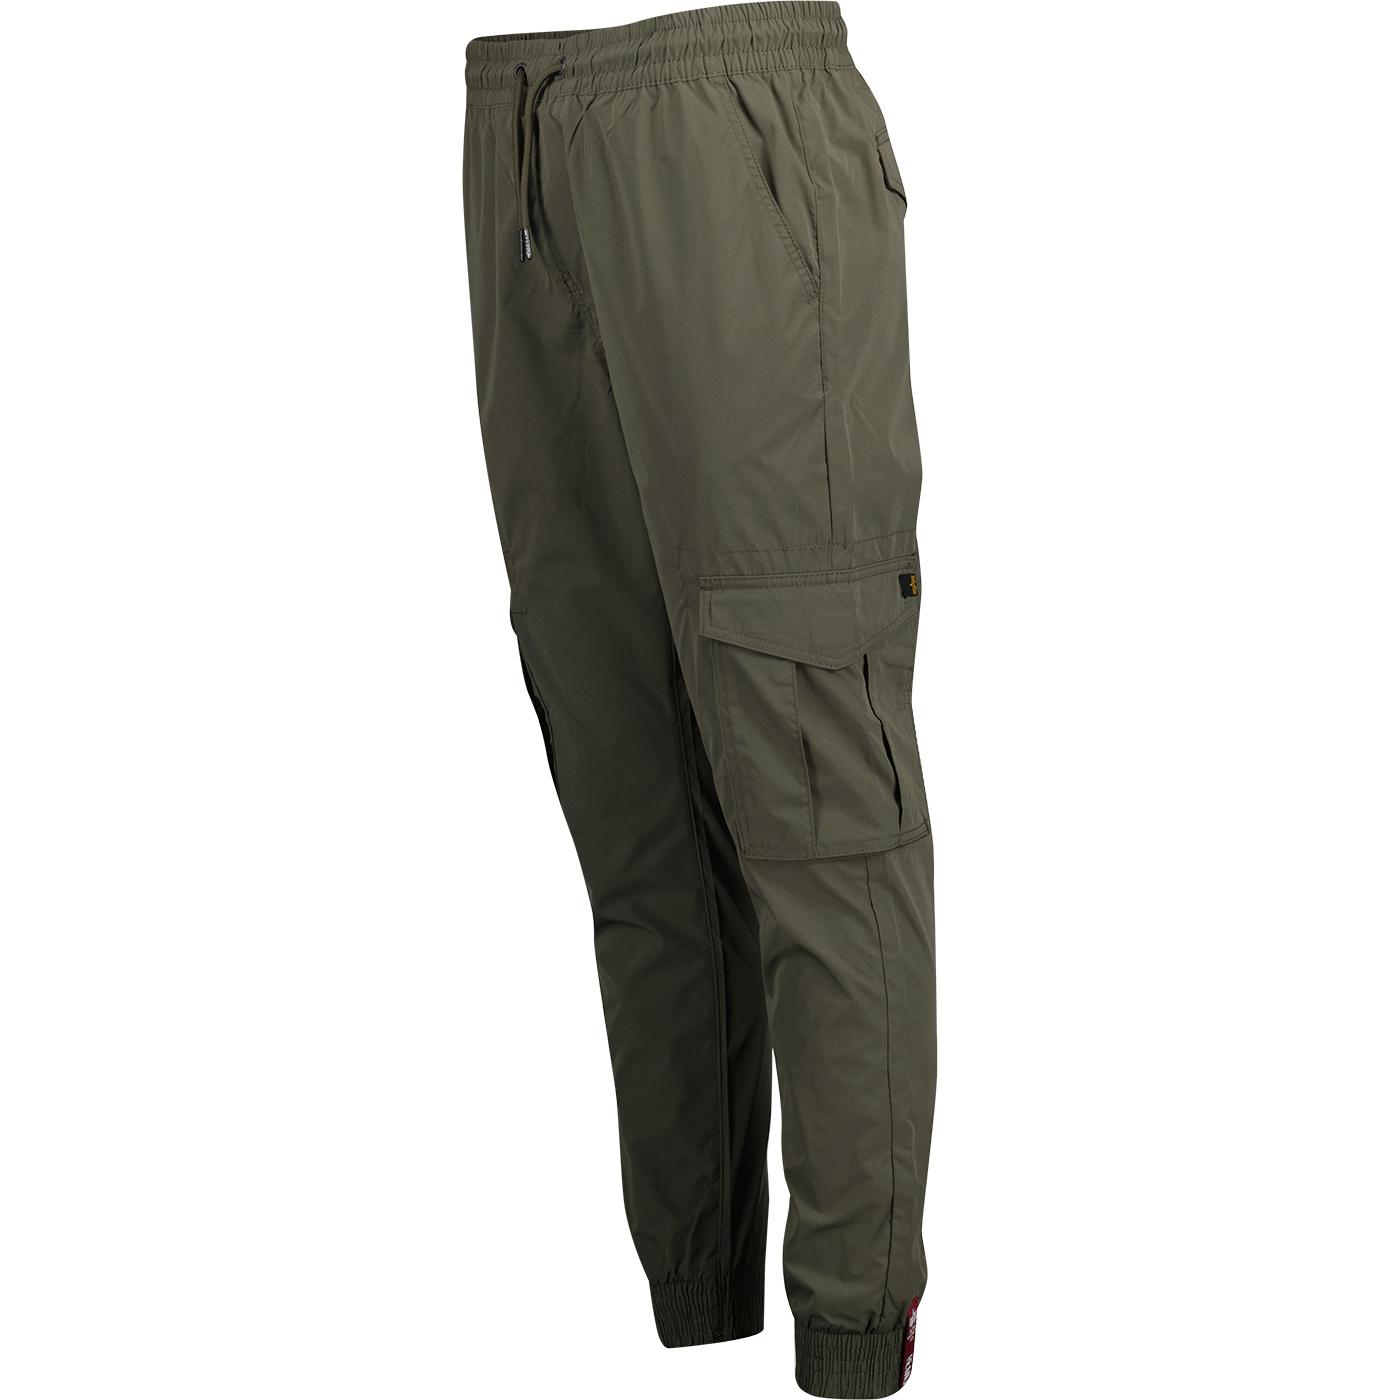 Joggers in INDUSTRIES Military Nylon Olive Dark ALPHA Cargo